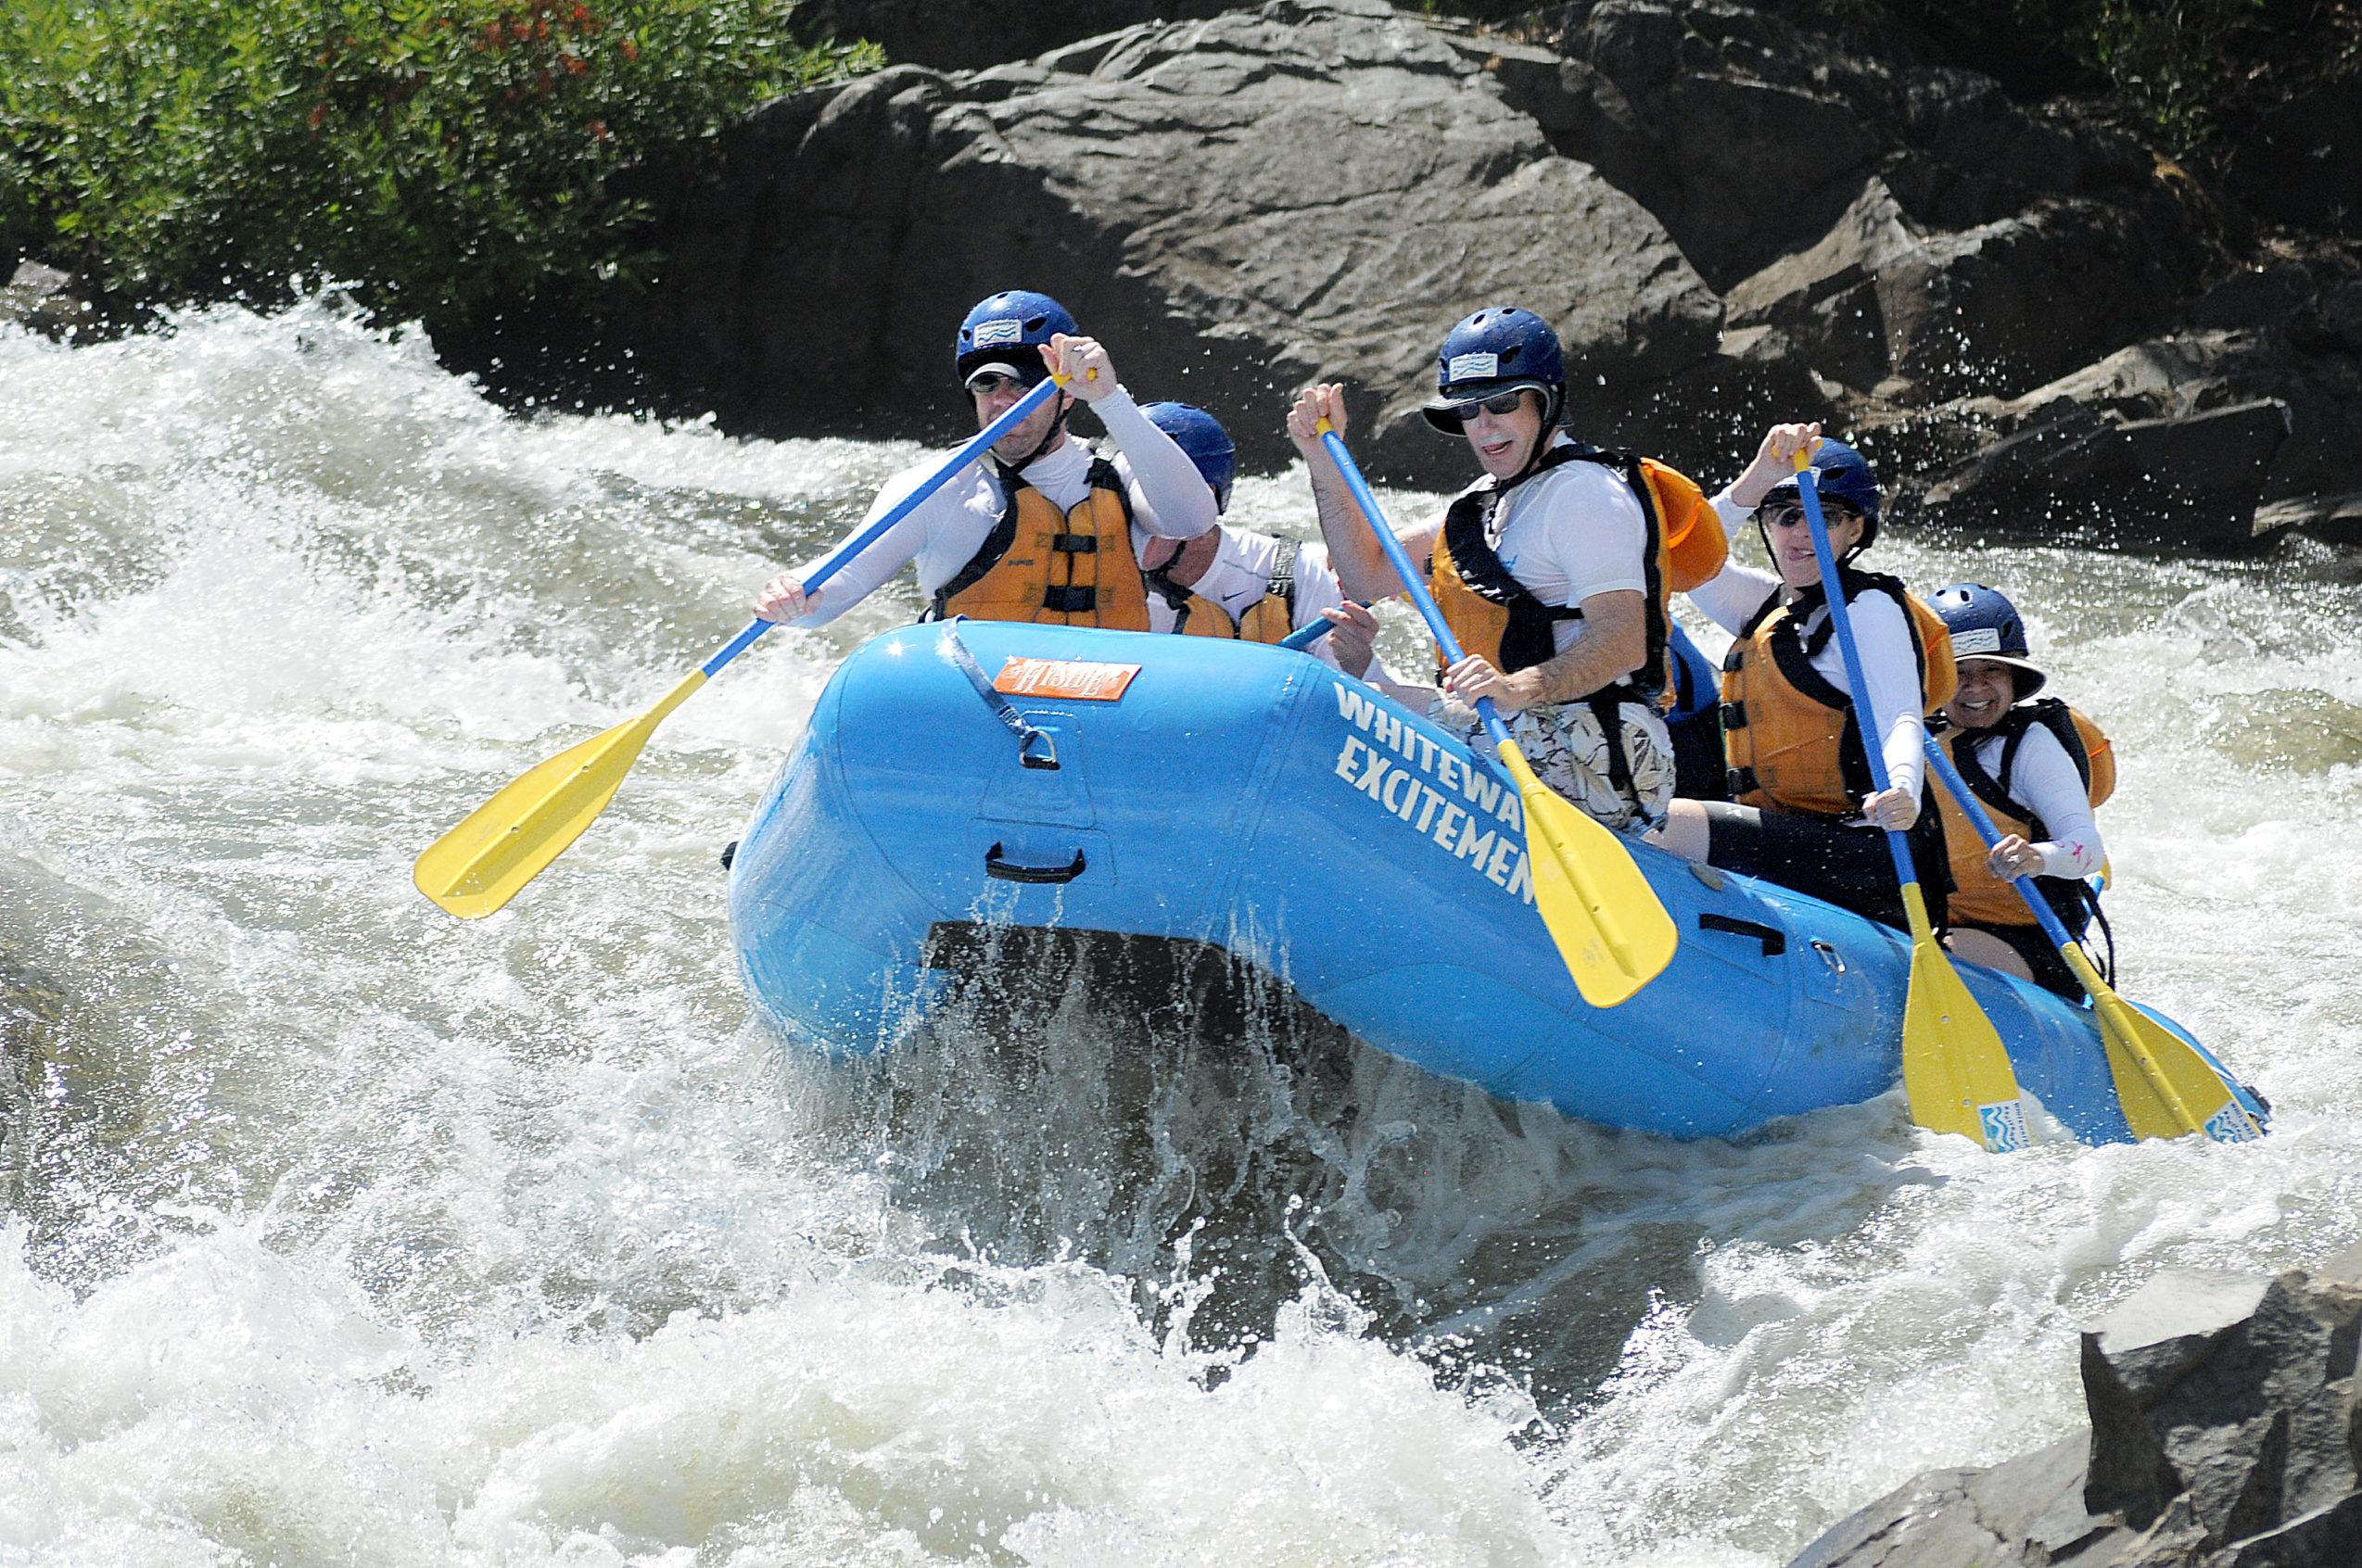 Whitewater Rafting Near the Bay Area | Whitewater Excitement